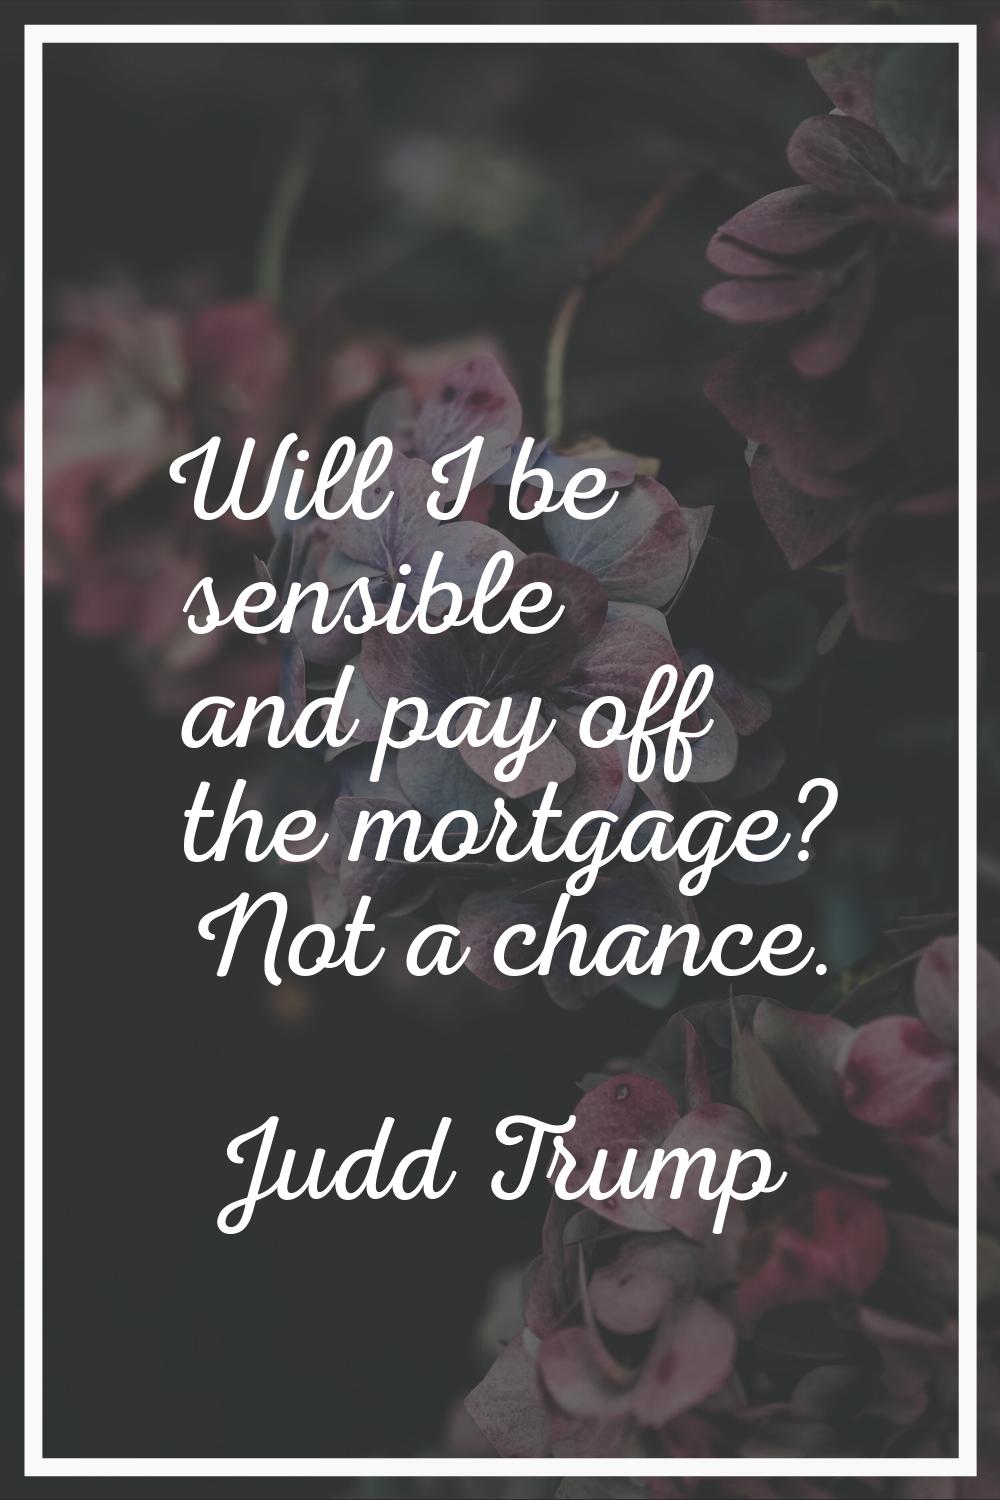 Will I be sensible and pay off the mortgage? Not a chance.